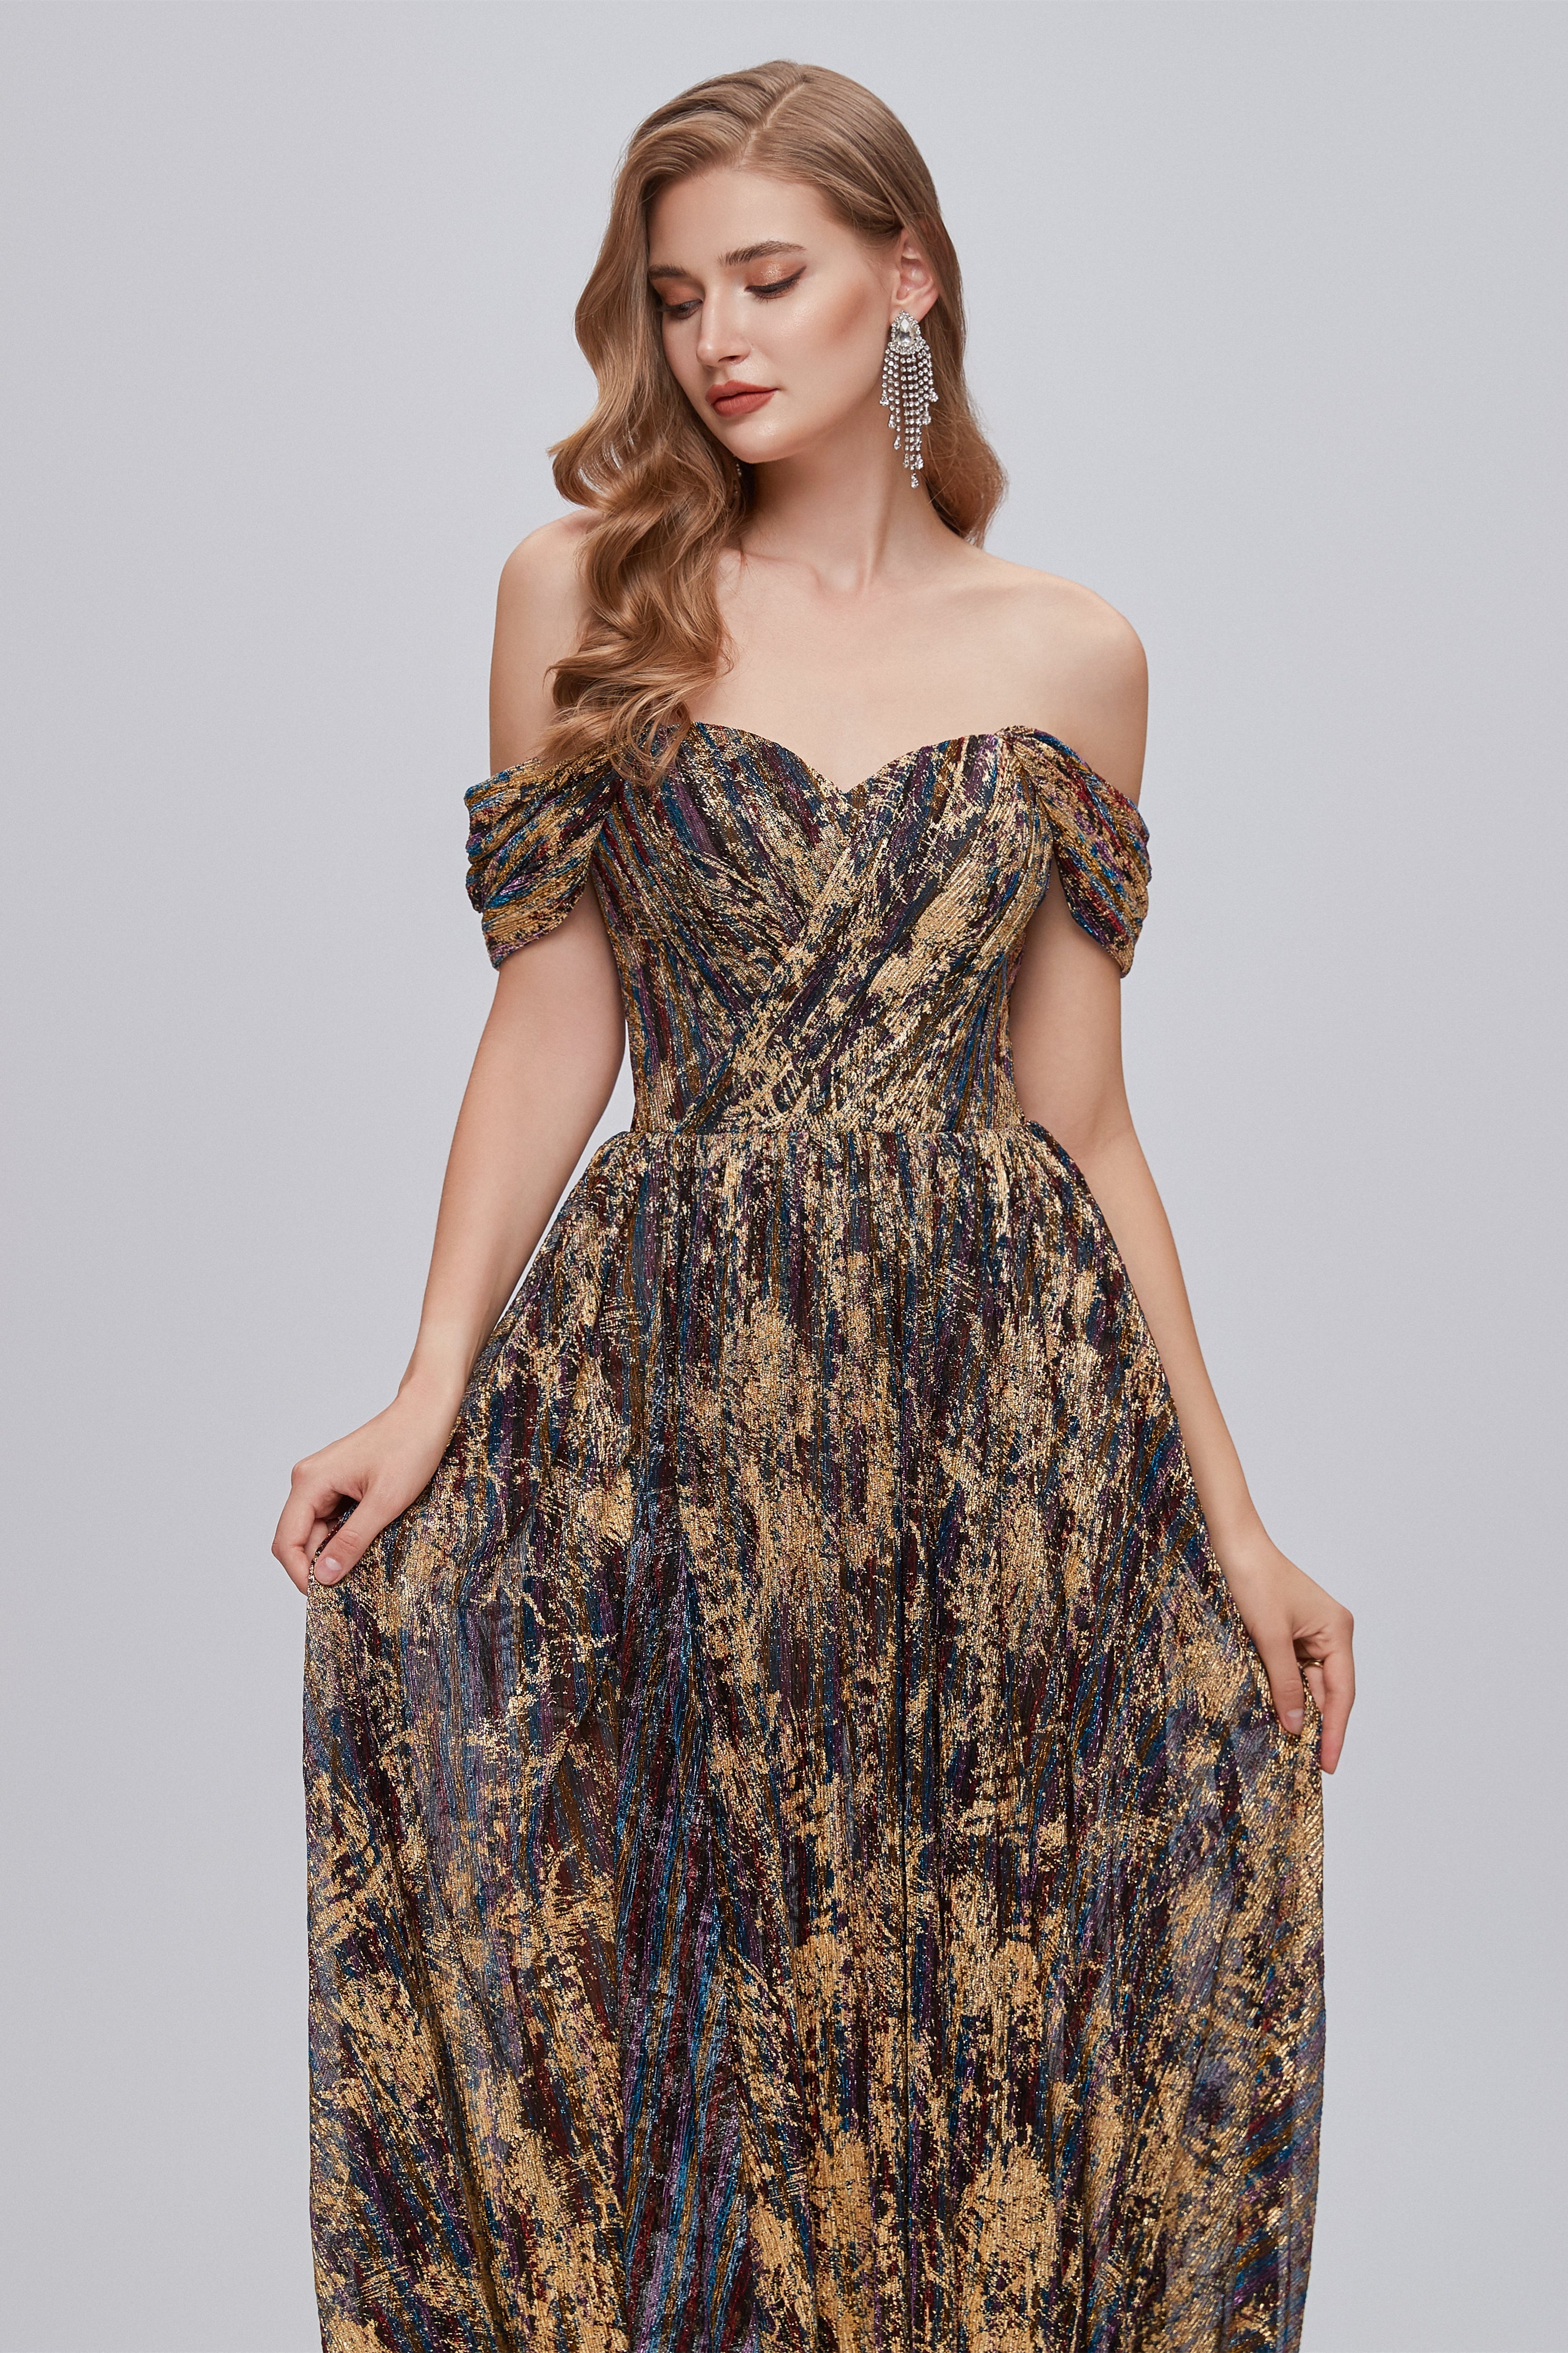 Black and Brown Floral Print Off-the-Shoulder A-Line Long Corset Prom Dress outfits, Dark Red Dress